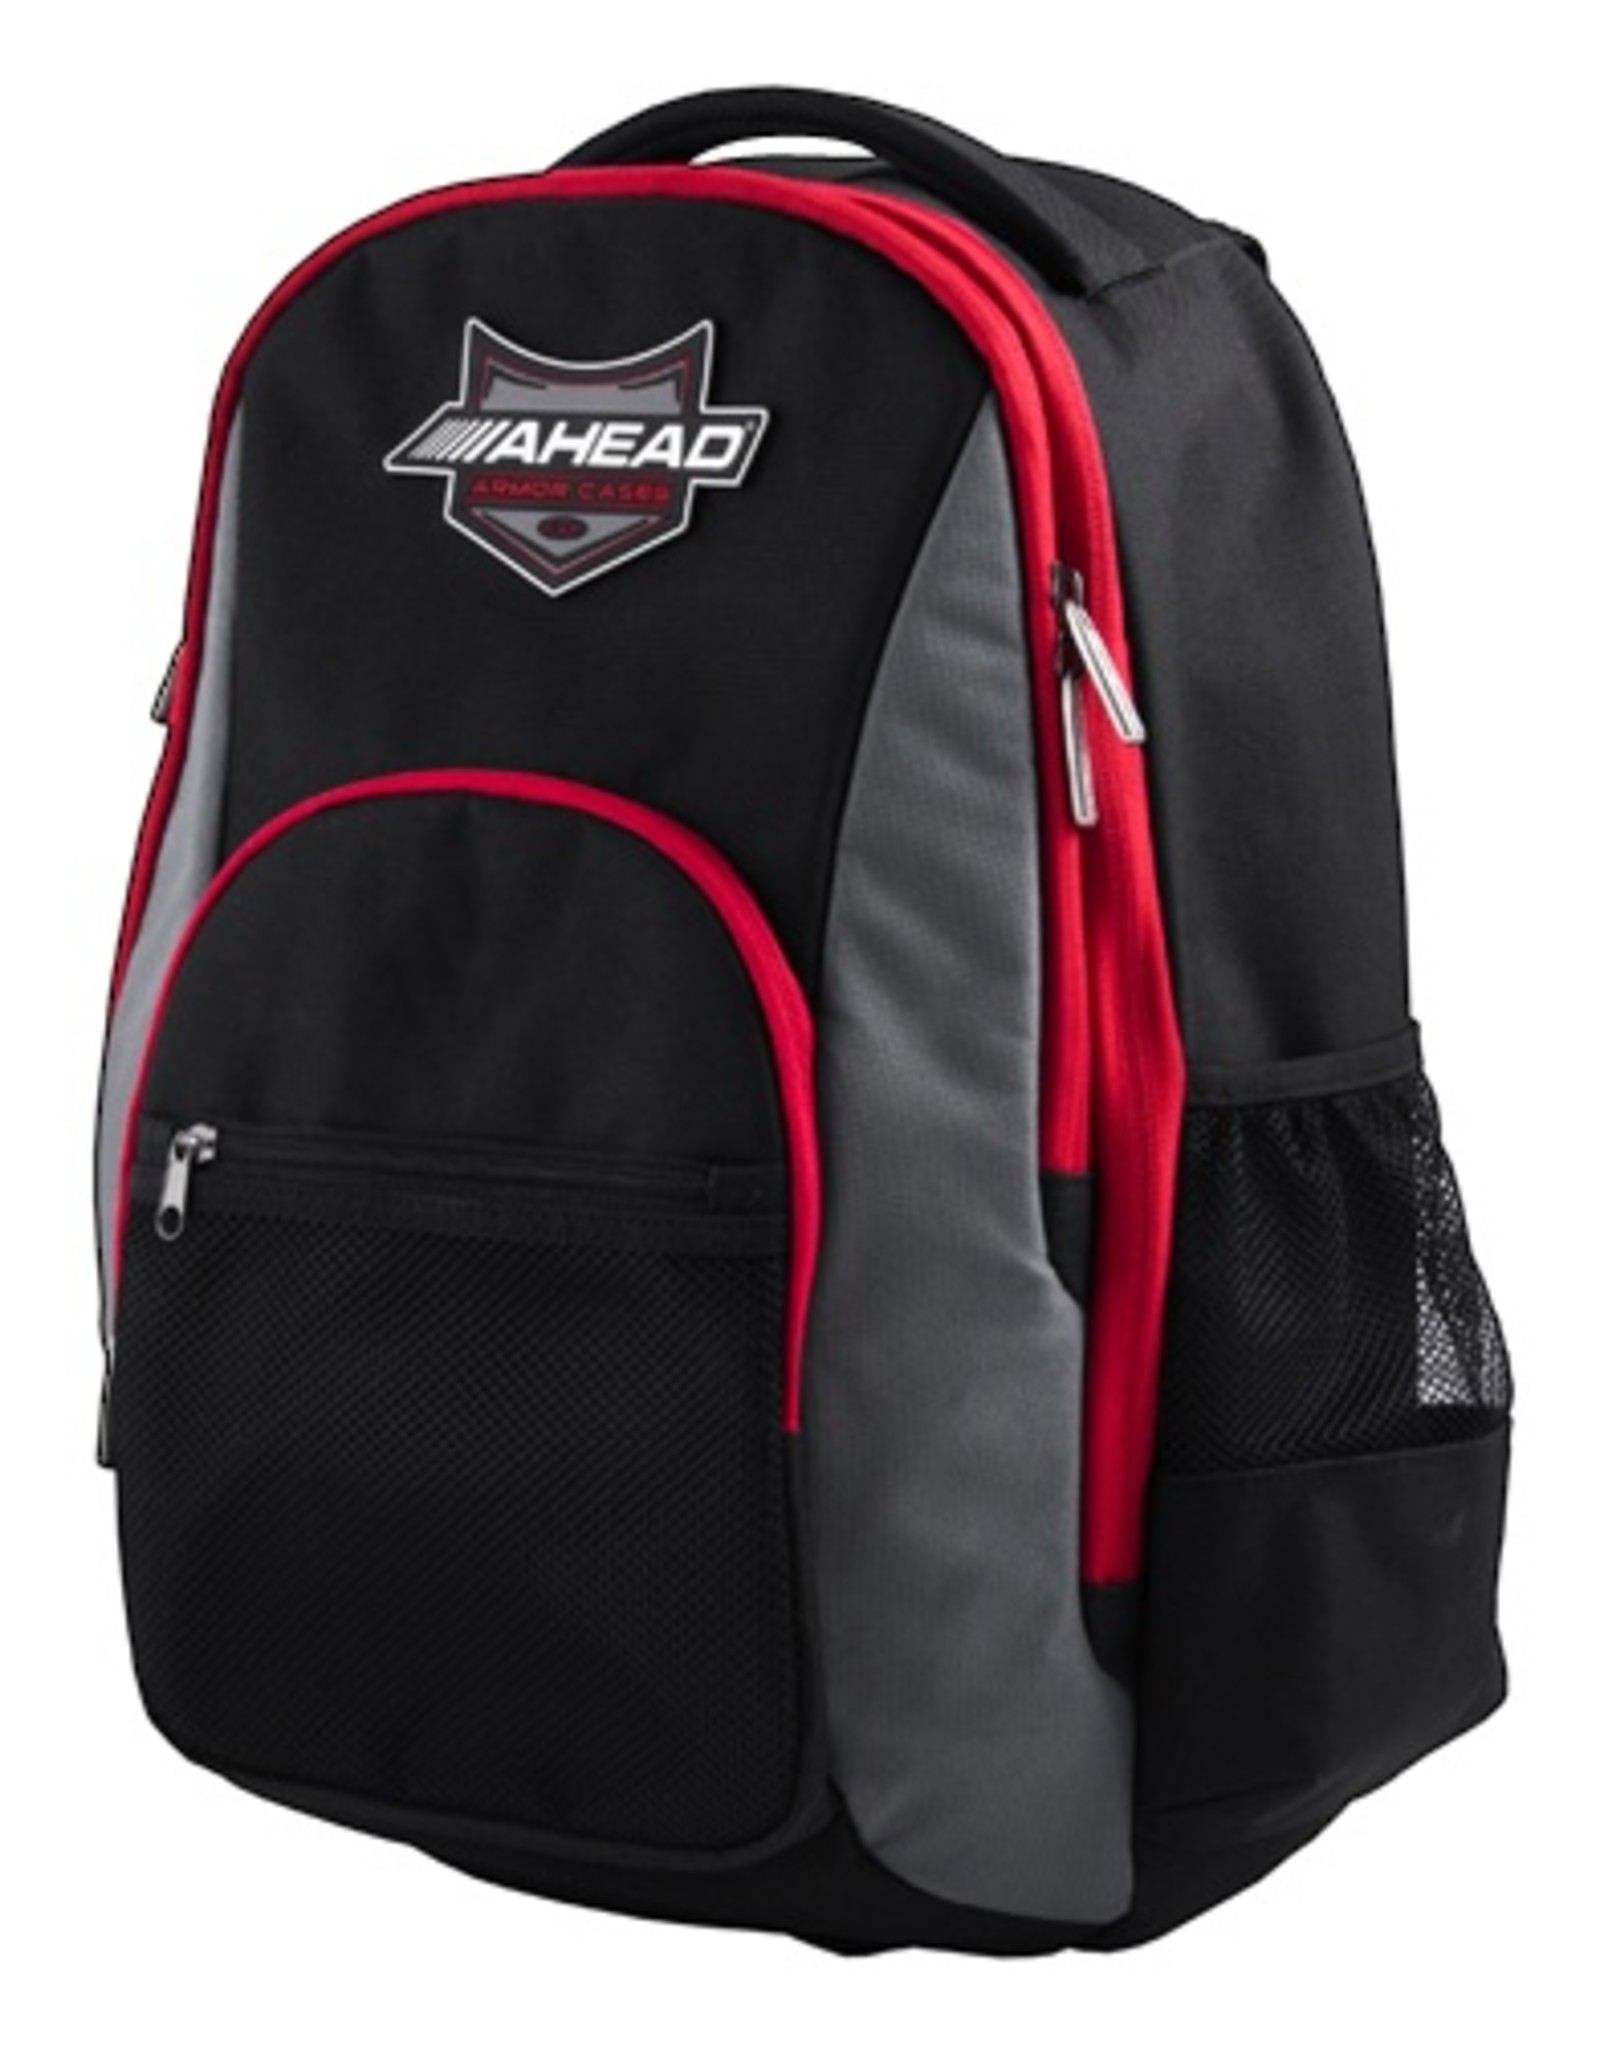 Ahead  ARMOR AABP BUSINESS CASES BACKPACK BACKPACK, LAPTOP BAG